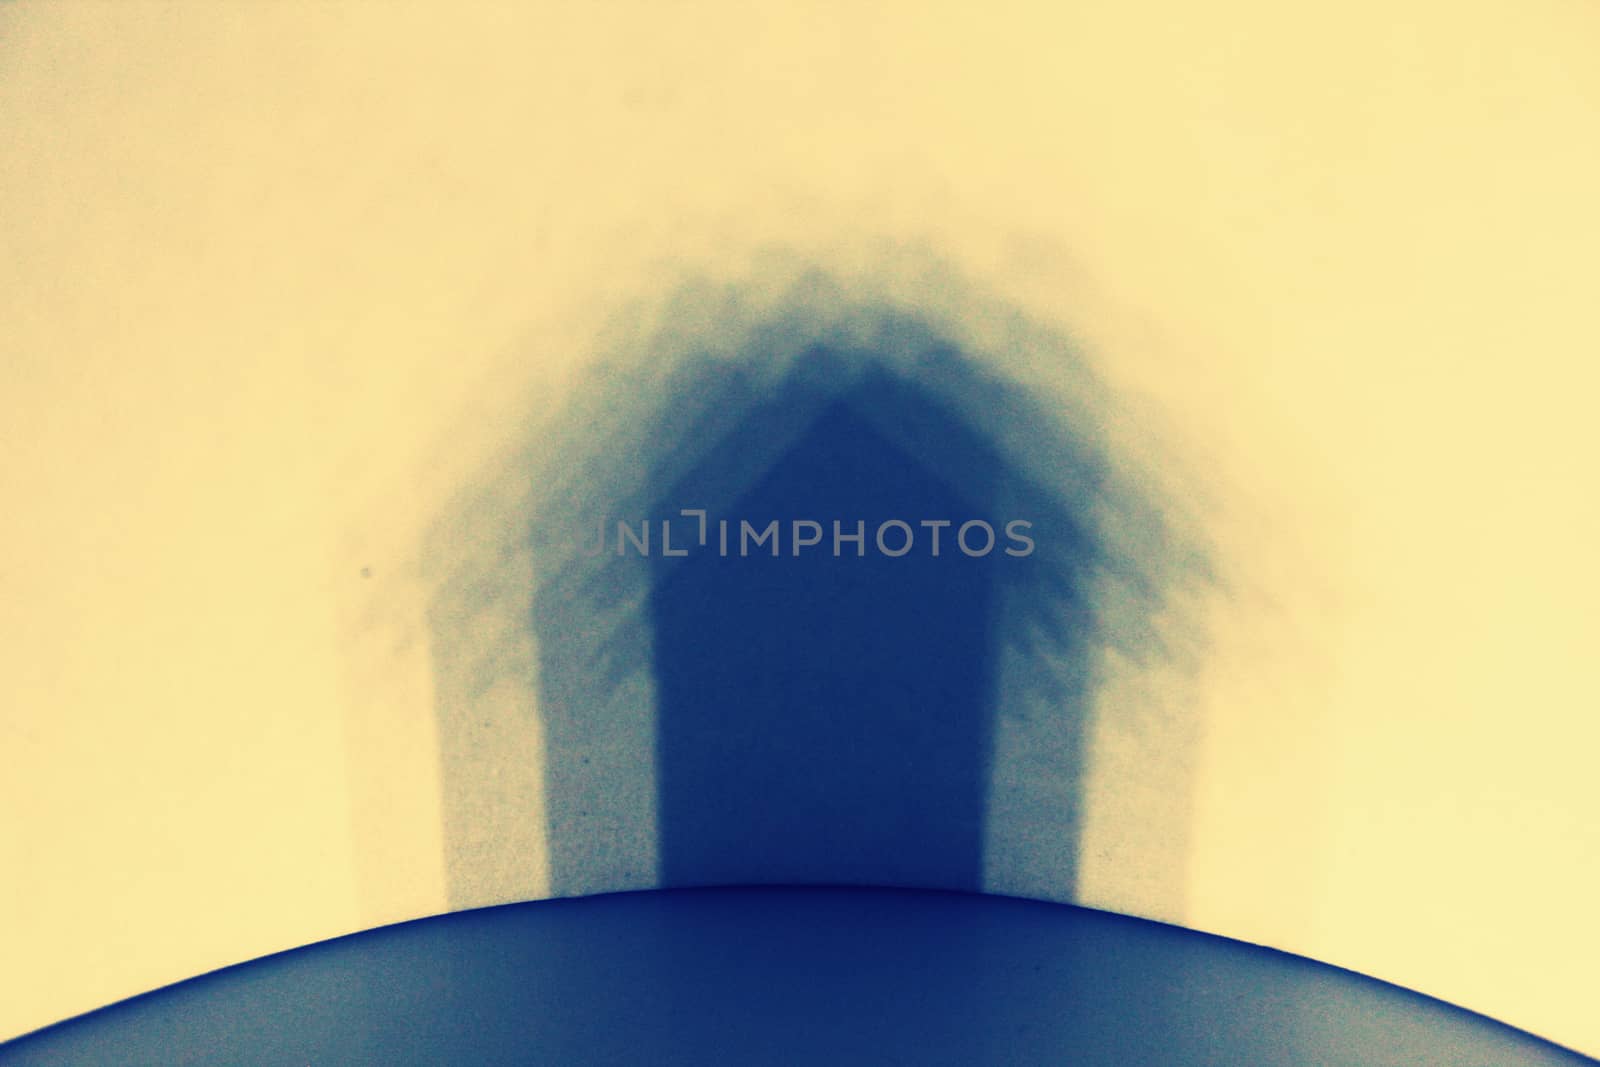 Multiple shadow of Miniature Home on wall by yands